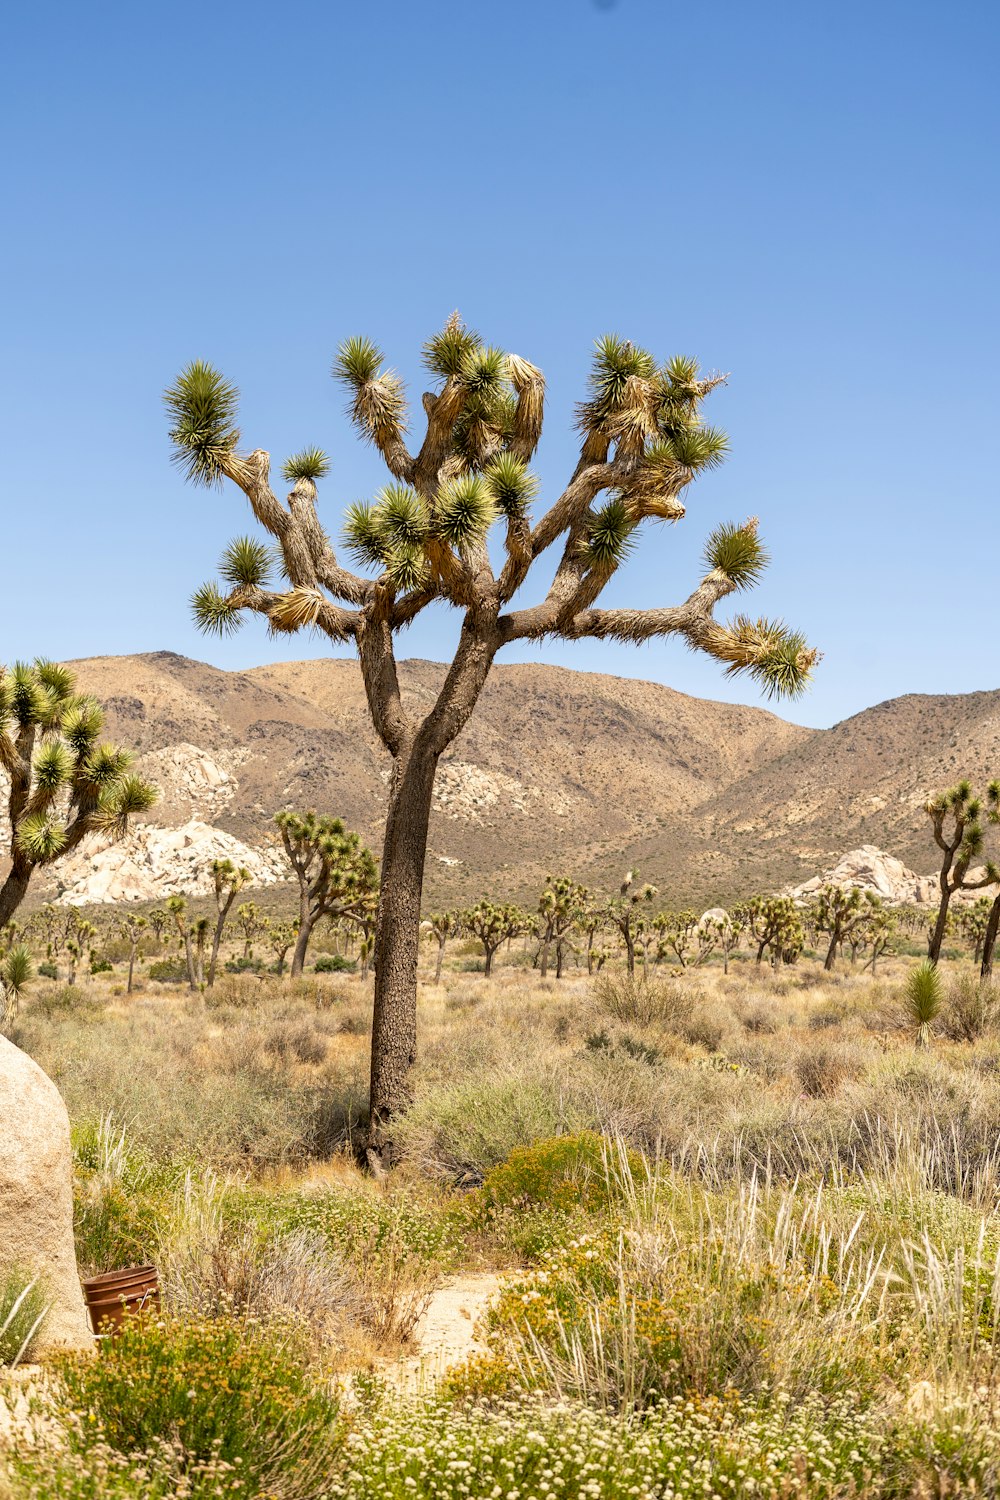 a joshua tree in the desert with mountains in the background